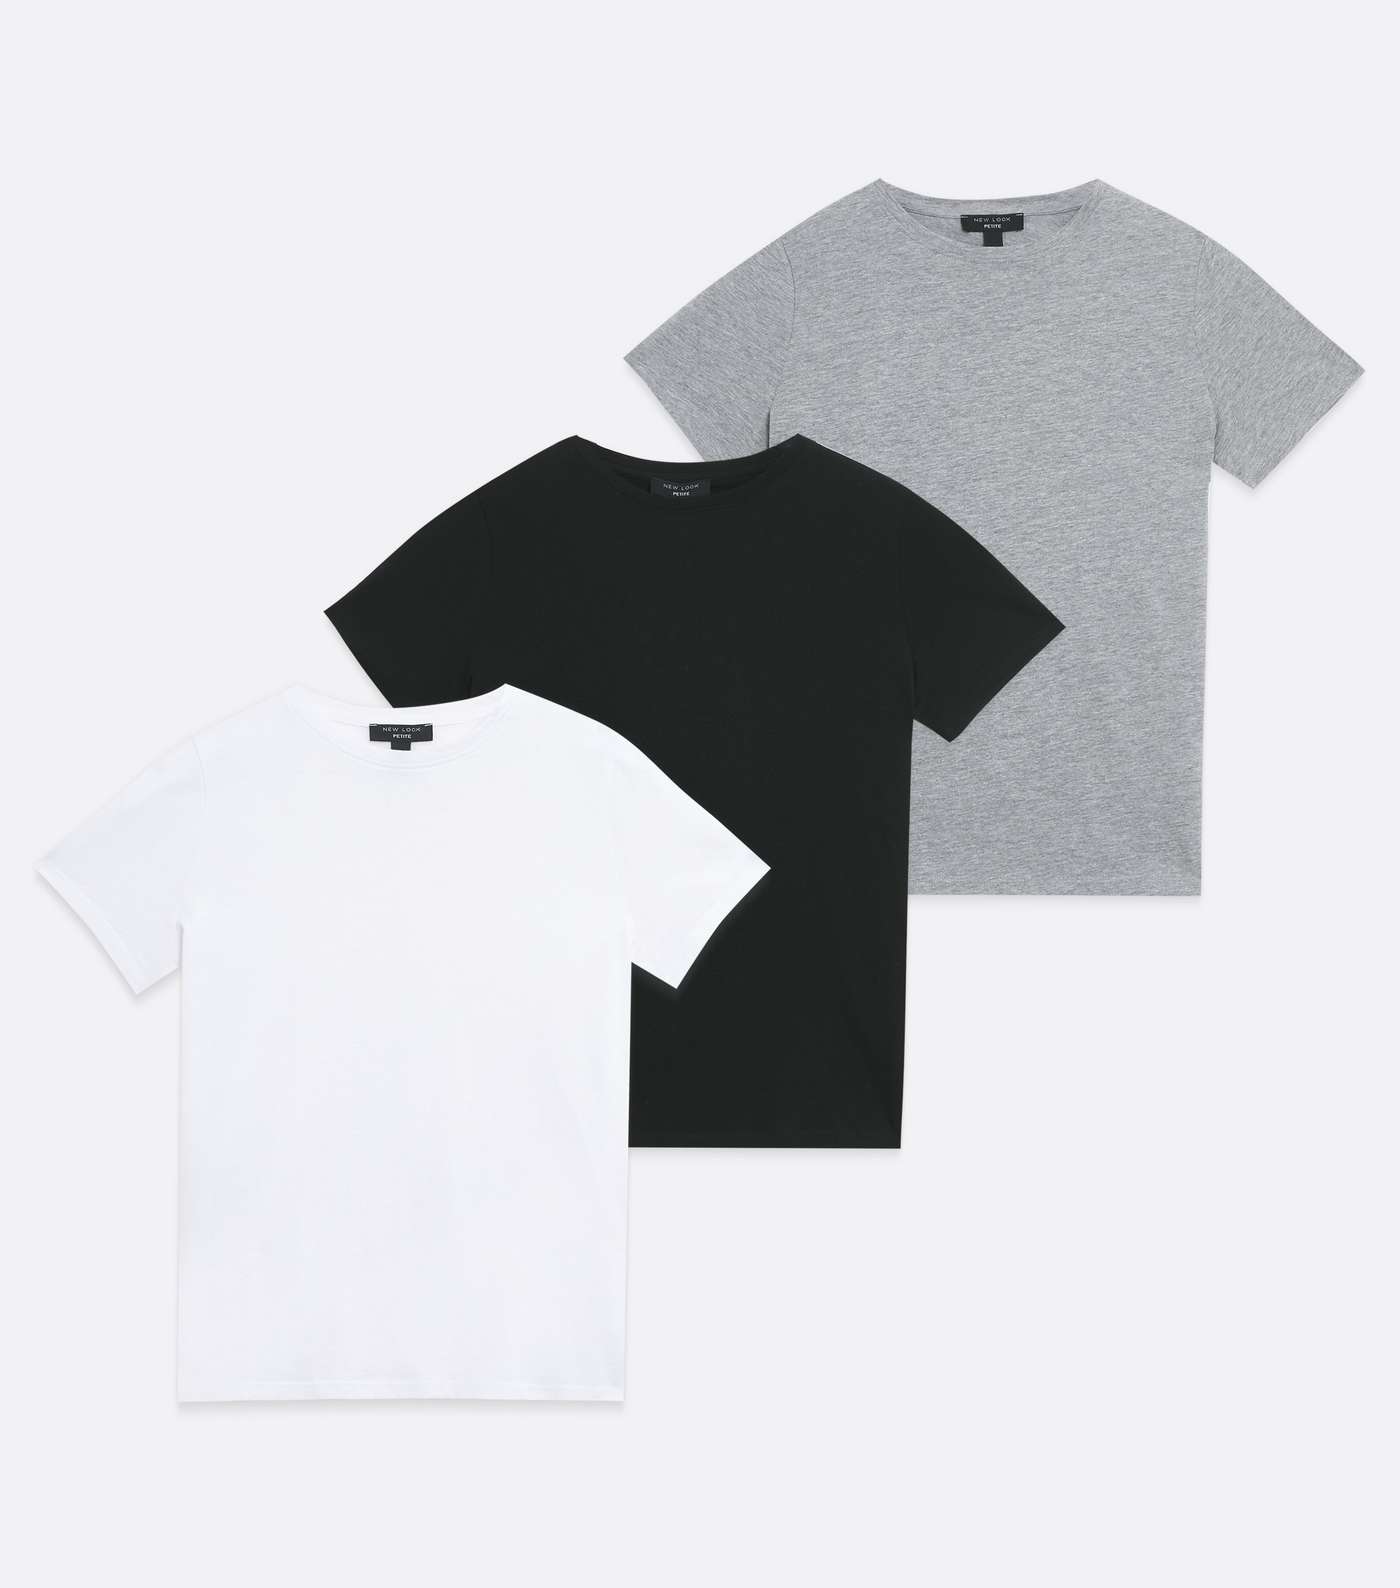 Petite 3 Pack Black White and Grey Crew Neck T-Shirts Image 5